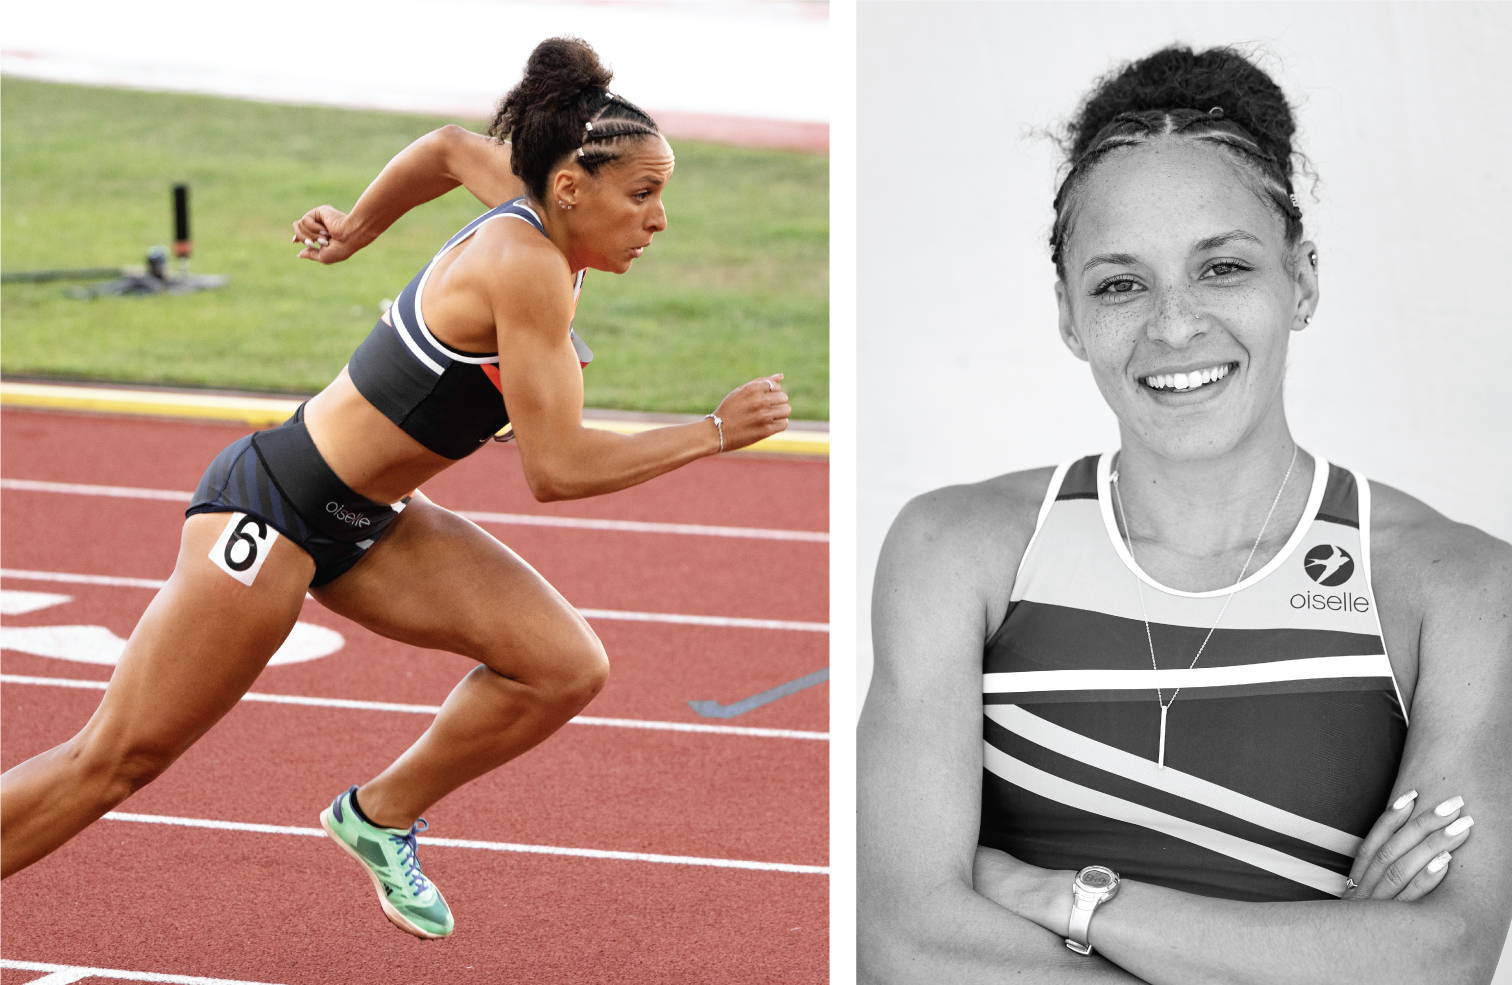 Left: Brenna Detra racing the 800meter. Right: Portrait of Brenna in her Oiselle uniform